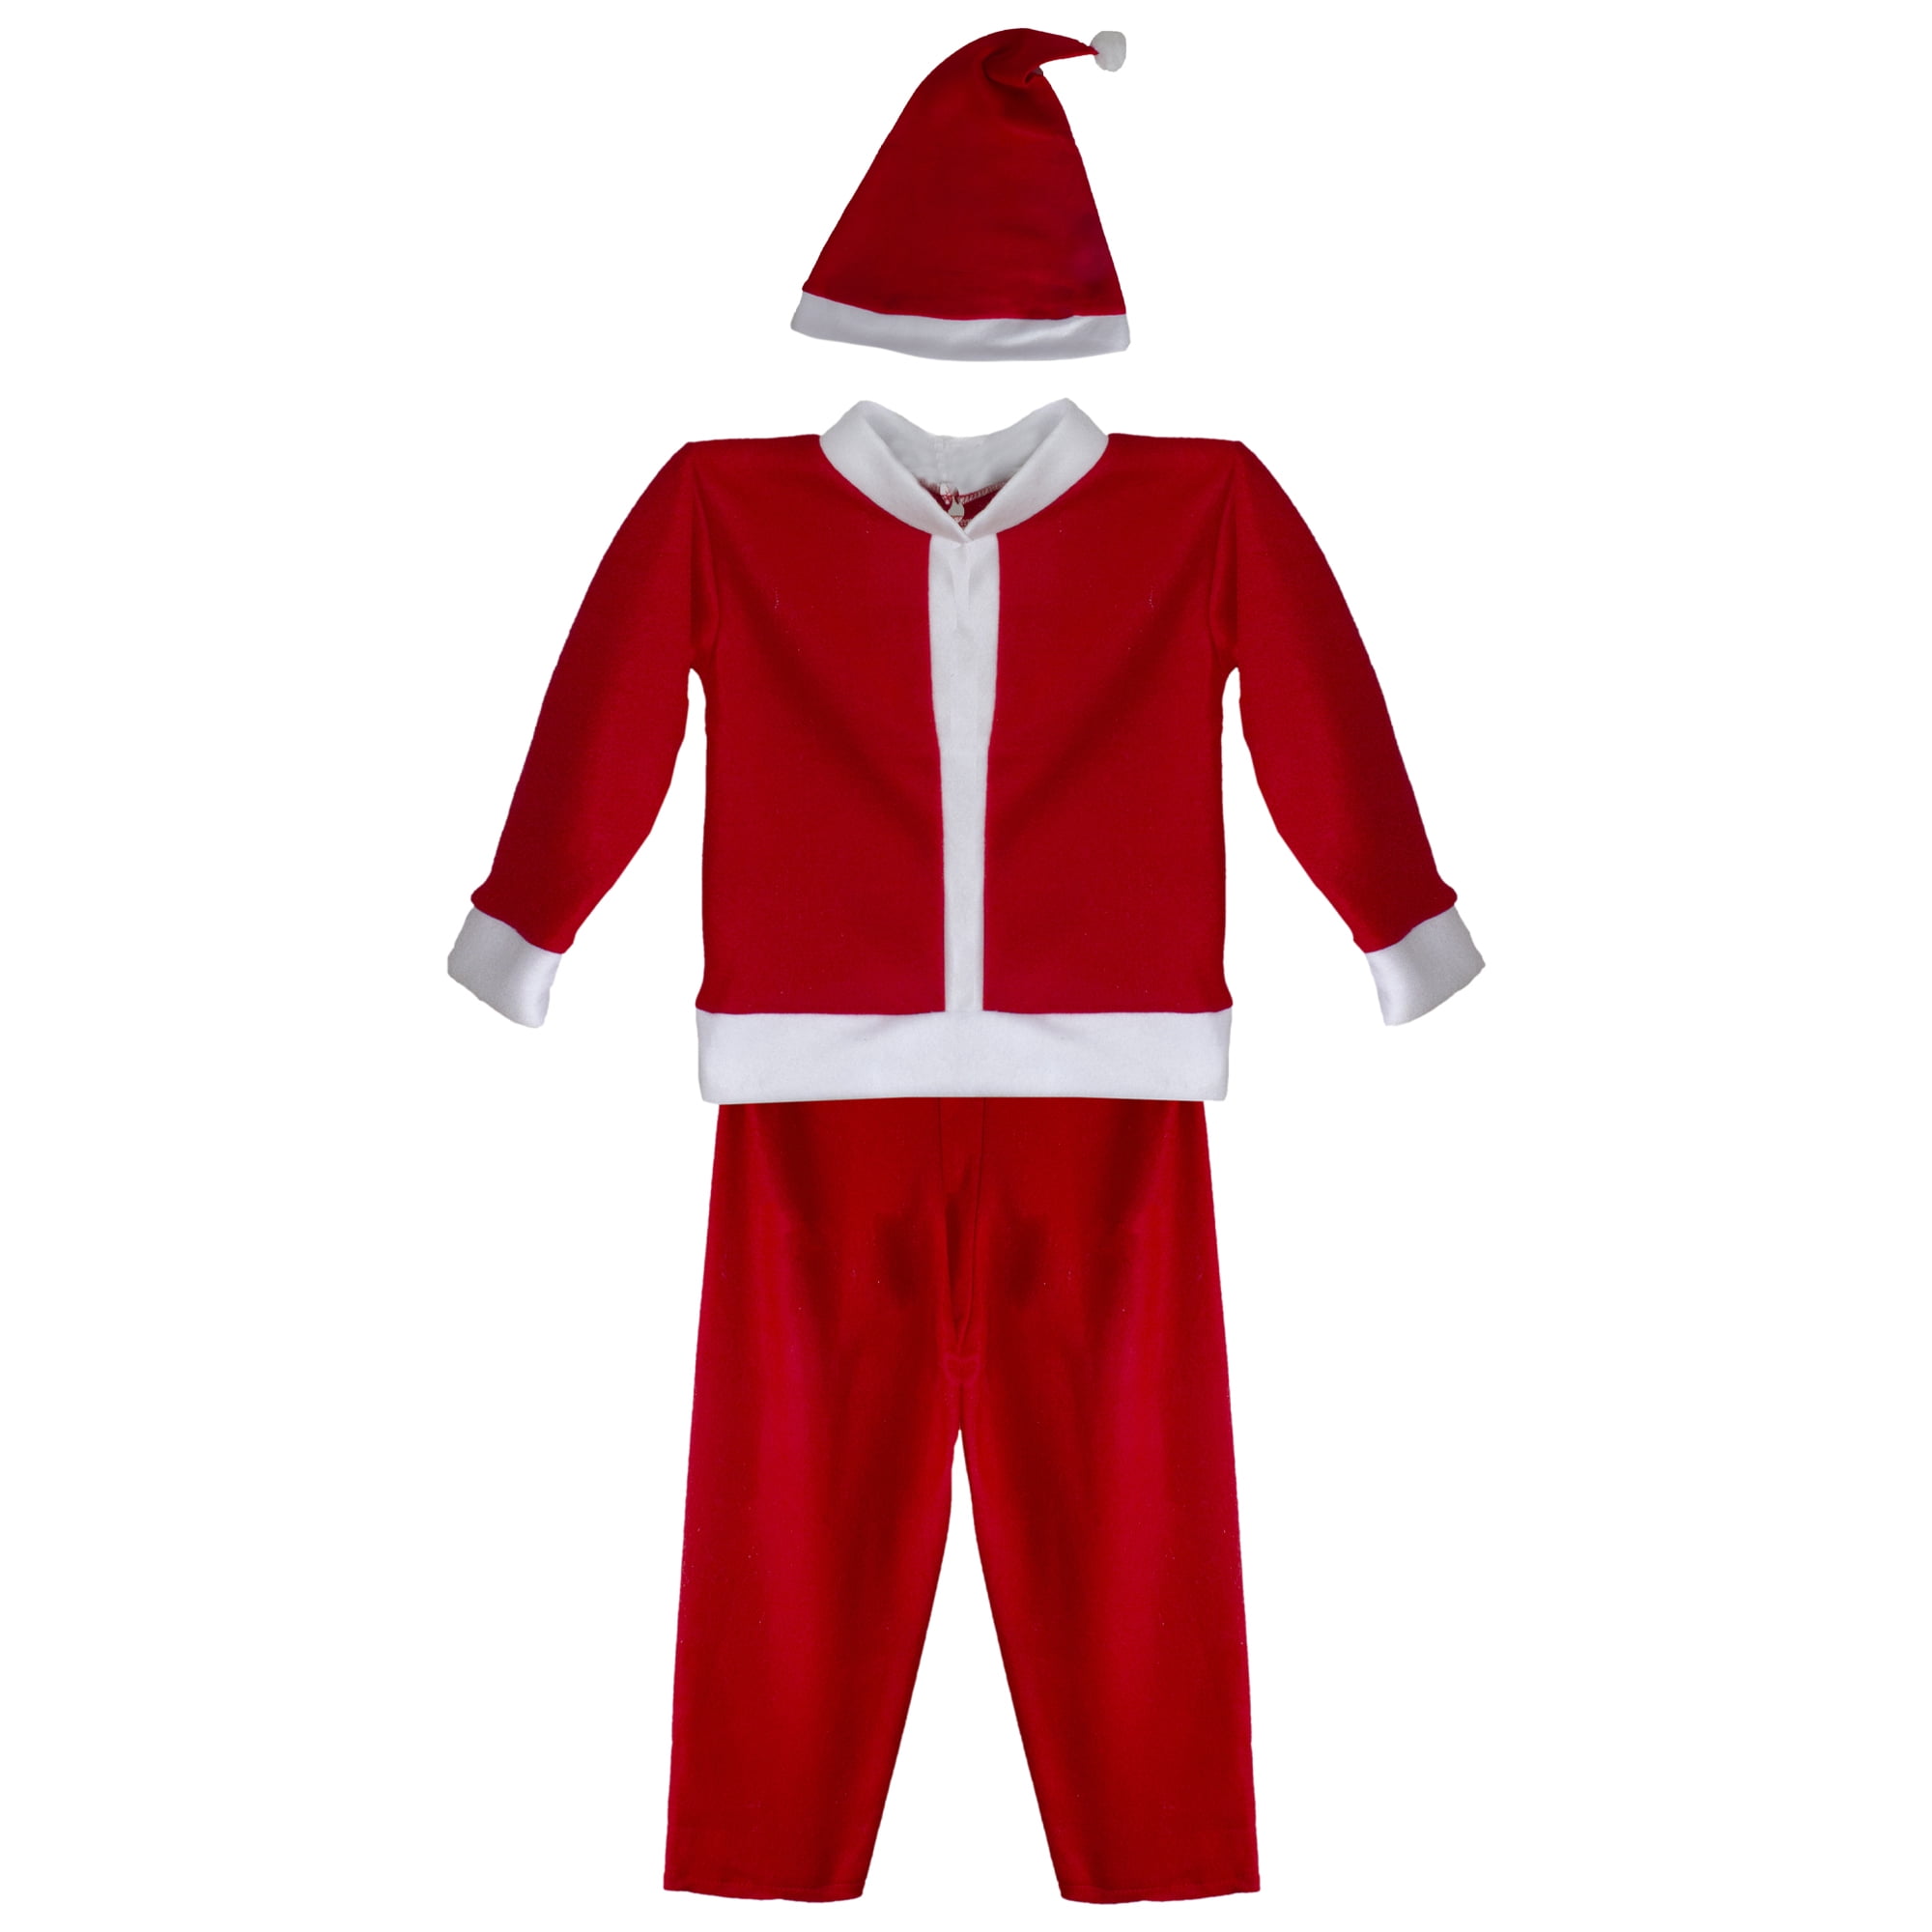 Buy arythe Kids Strawberry Suit for Children's Day Party Costume Fruit Fancy  Dress Online at Low Prices in India - Amazon.in